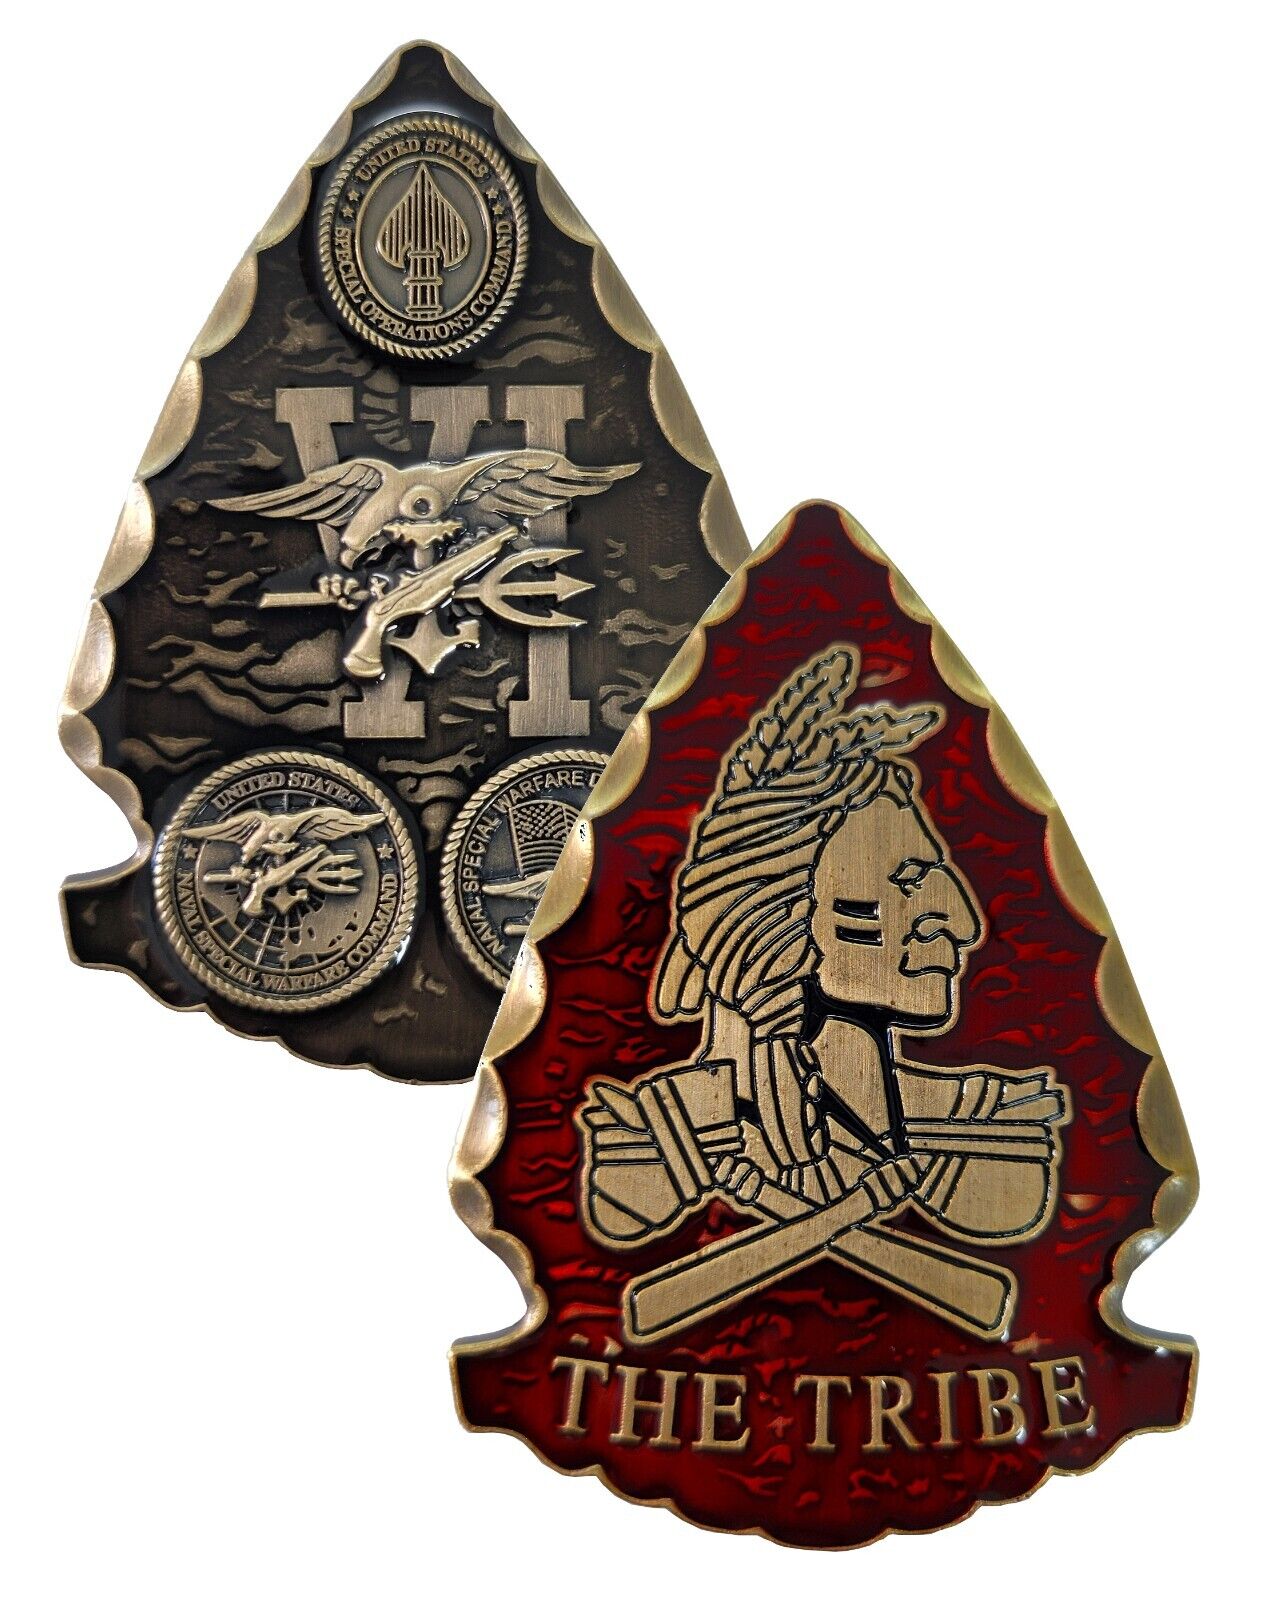 Navy Seal Team Six The Tribe Red Squadron SEALS DEVGRU SOCOM Challenge Coin 